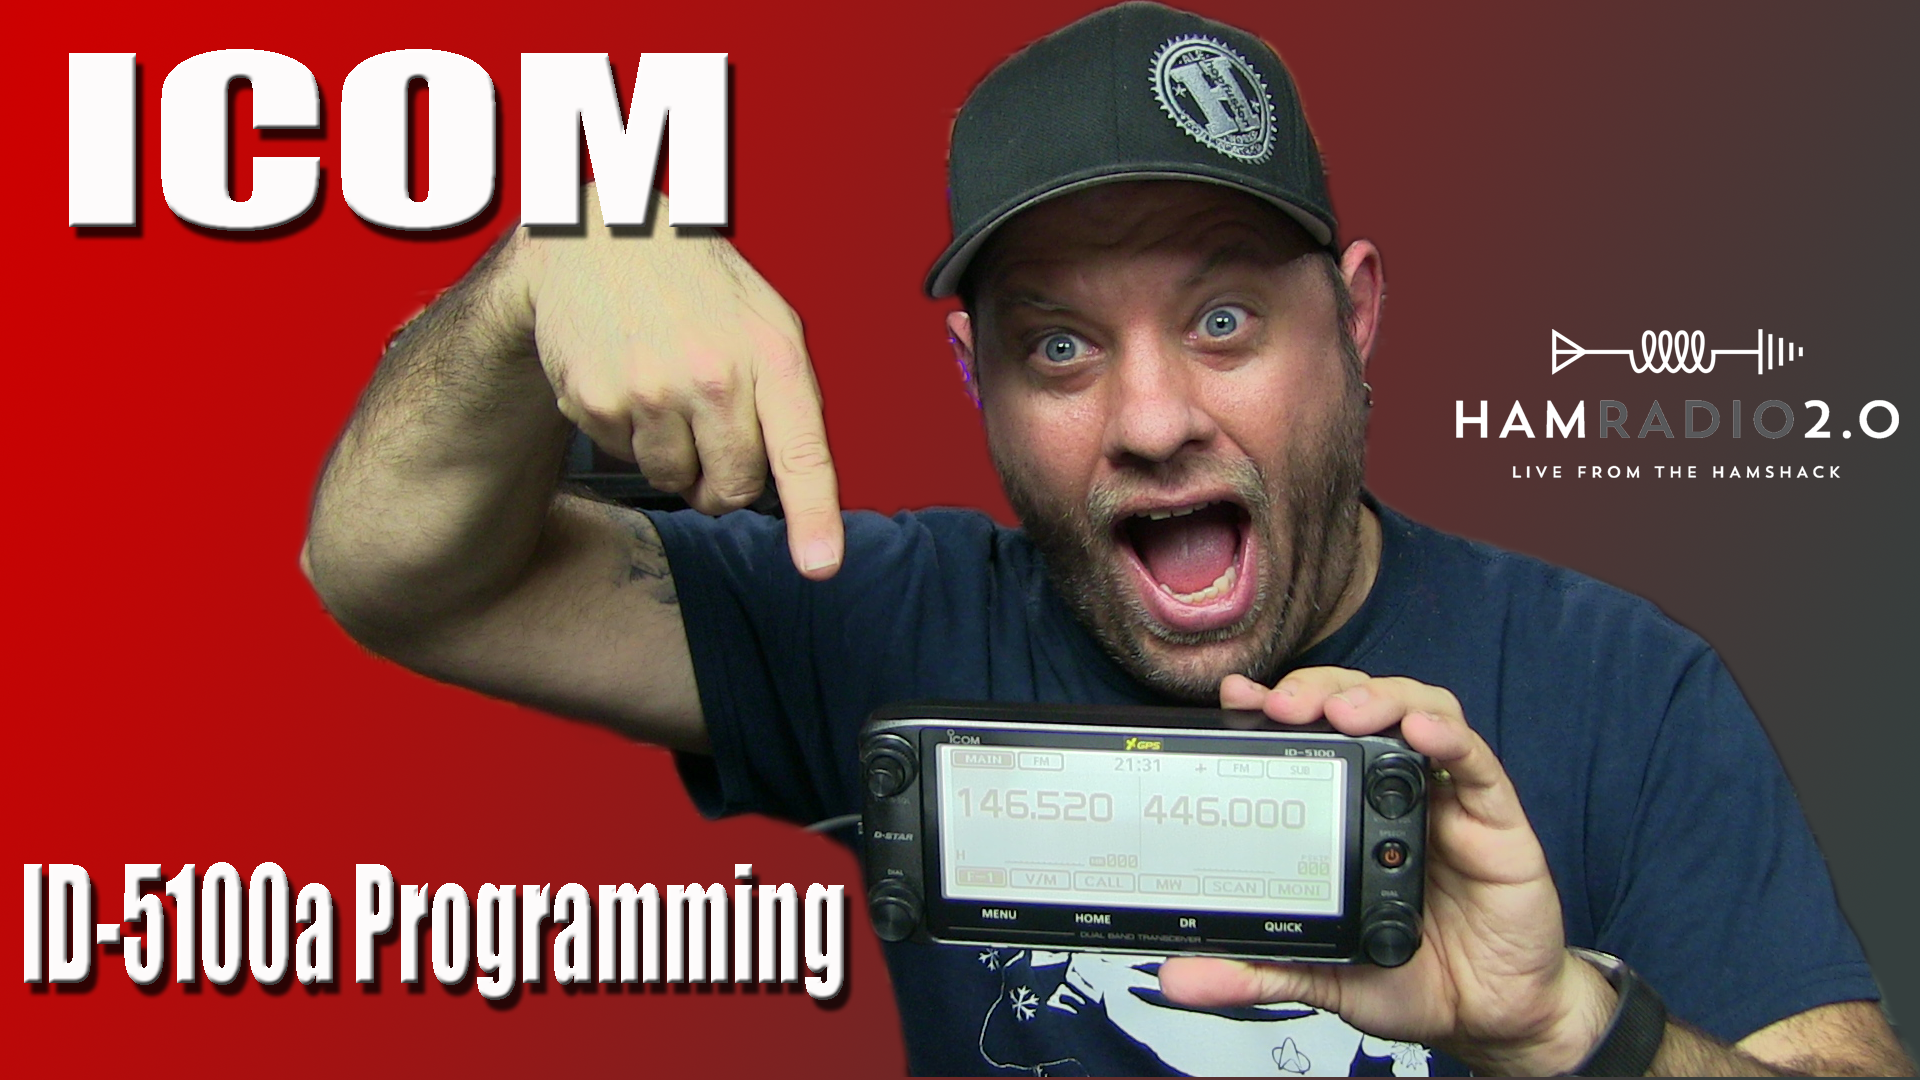 Episode 175: Icom ID-5100a Unboxing and Programming